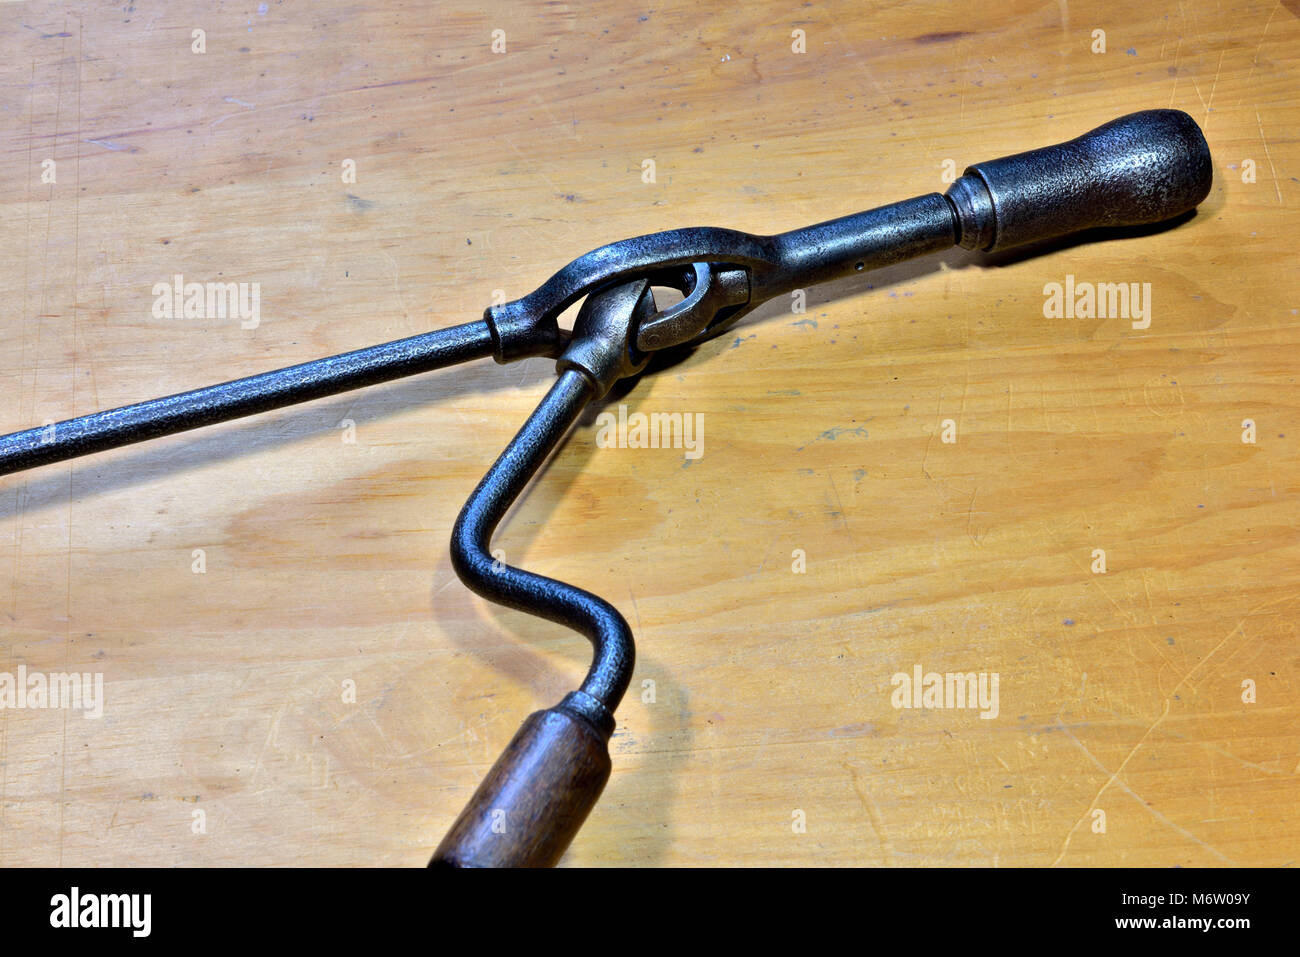 Close up of universal joint in antique hand operated corner brace drill Stock Photo